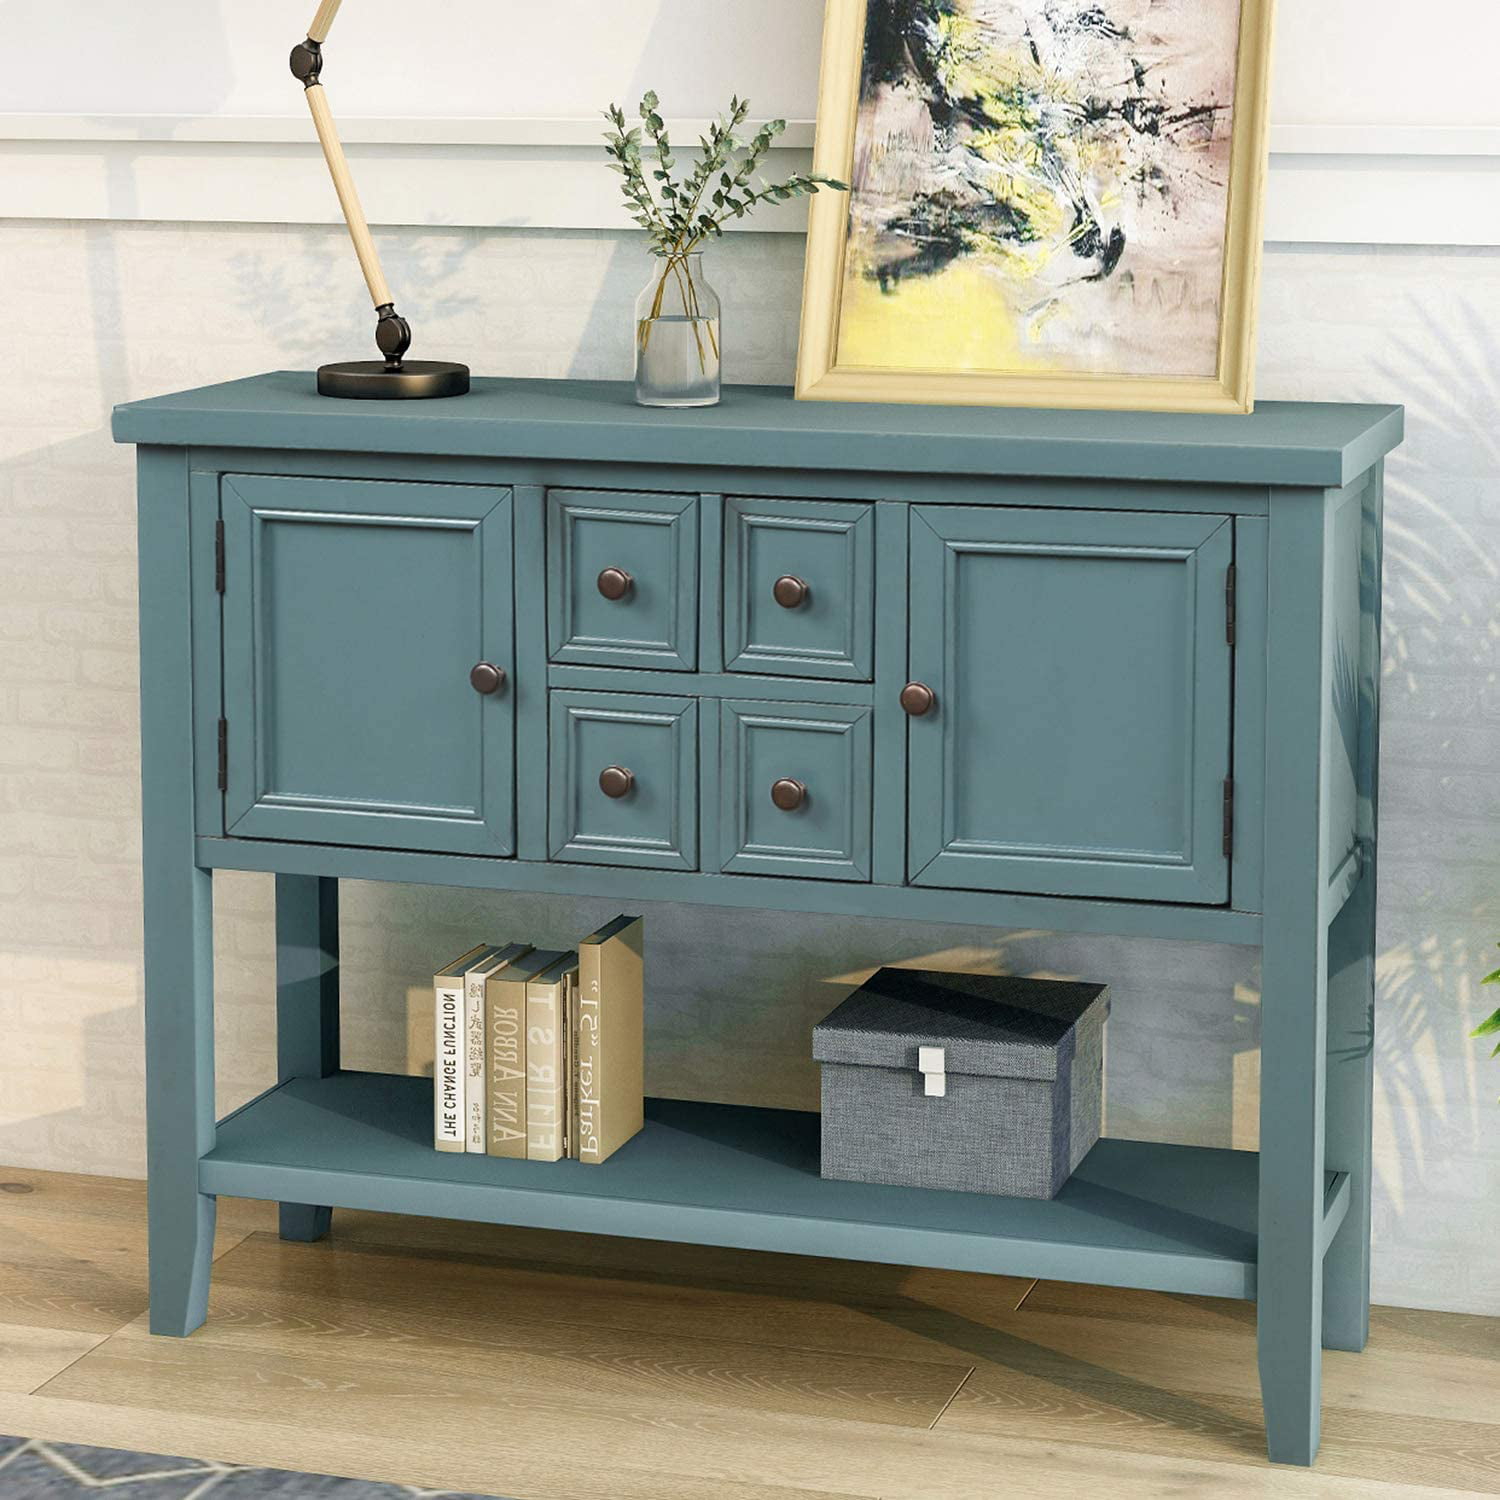 Antique Grey P PURLOVE Console Table Sideboard with Storage Drawers Cabinets and Bottom Shelf